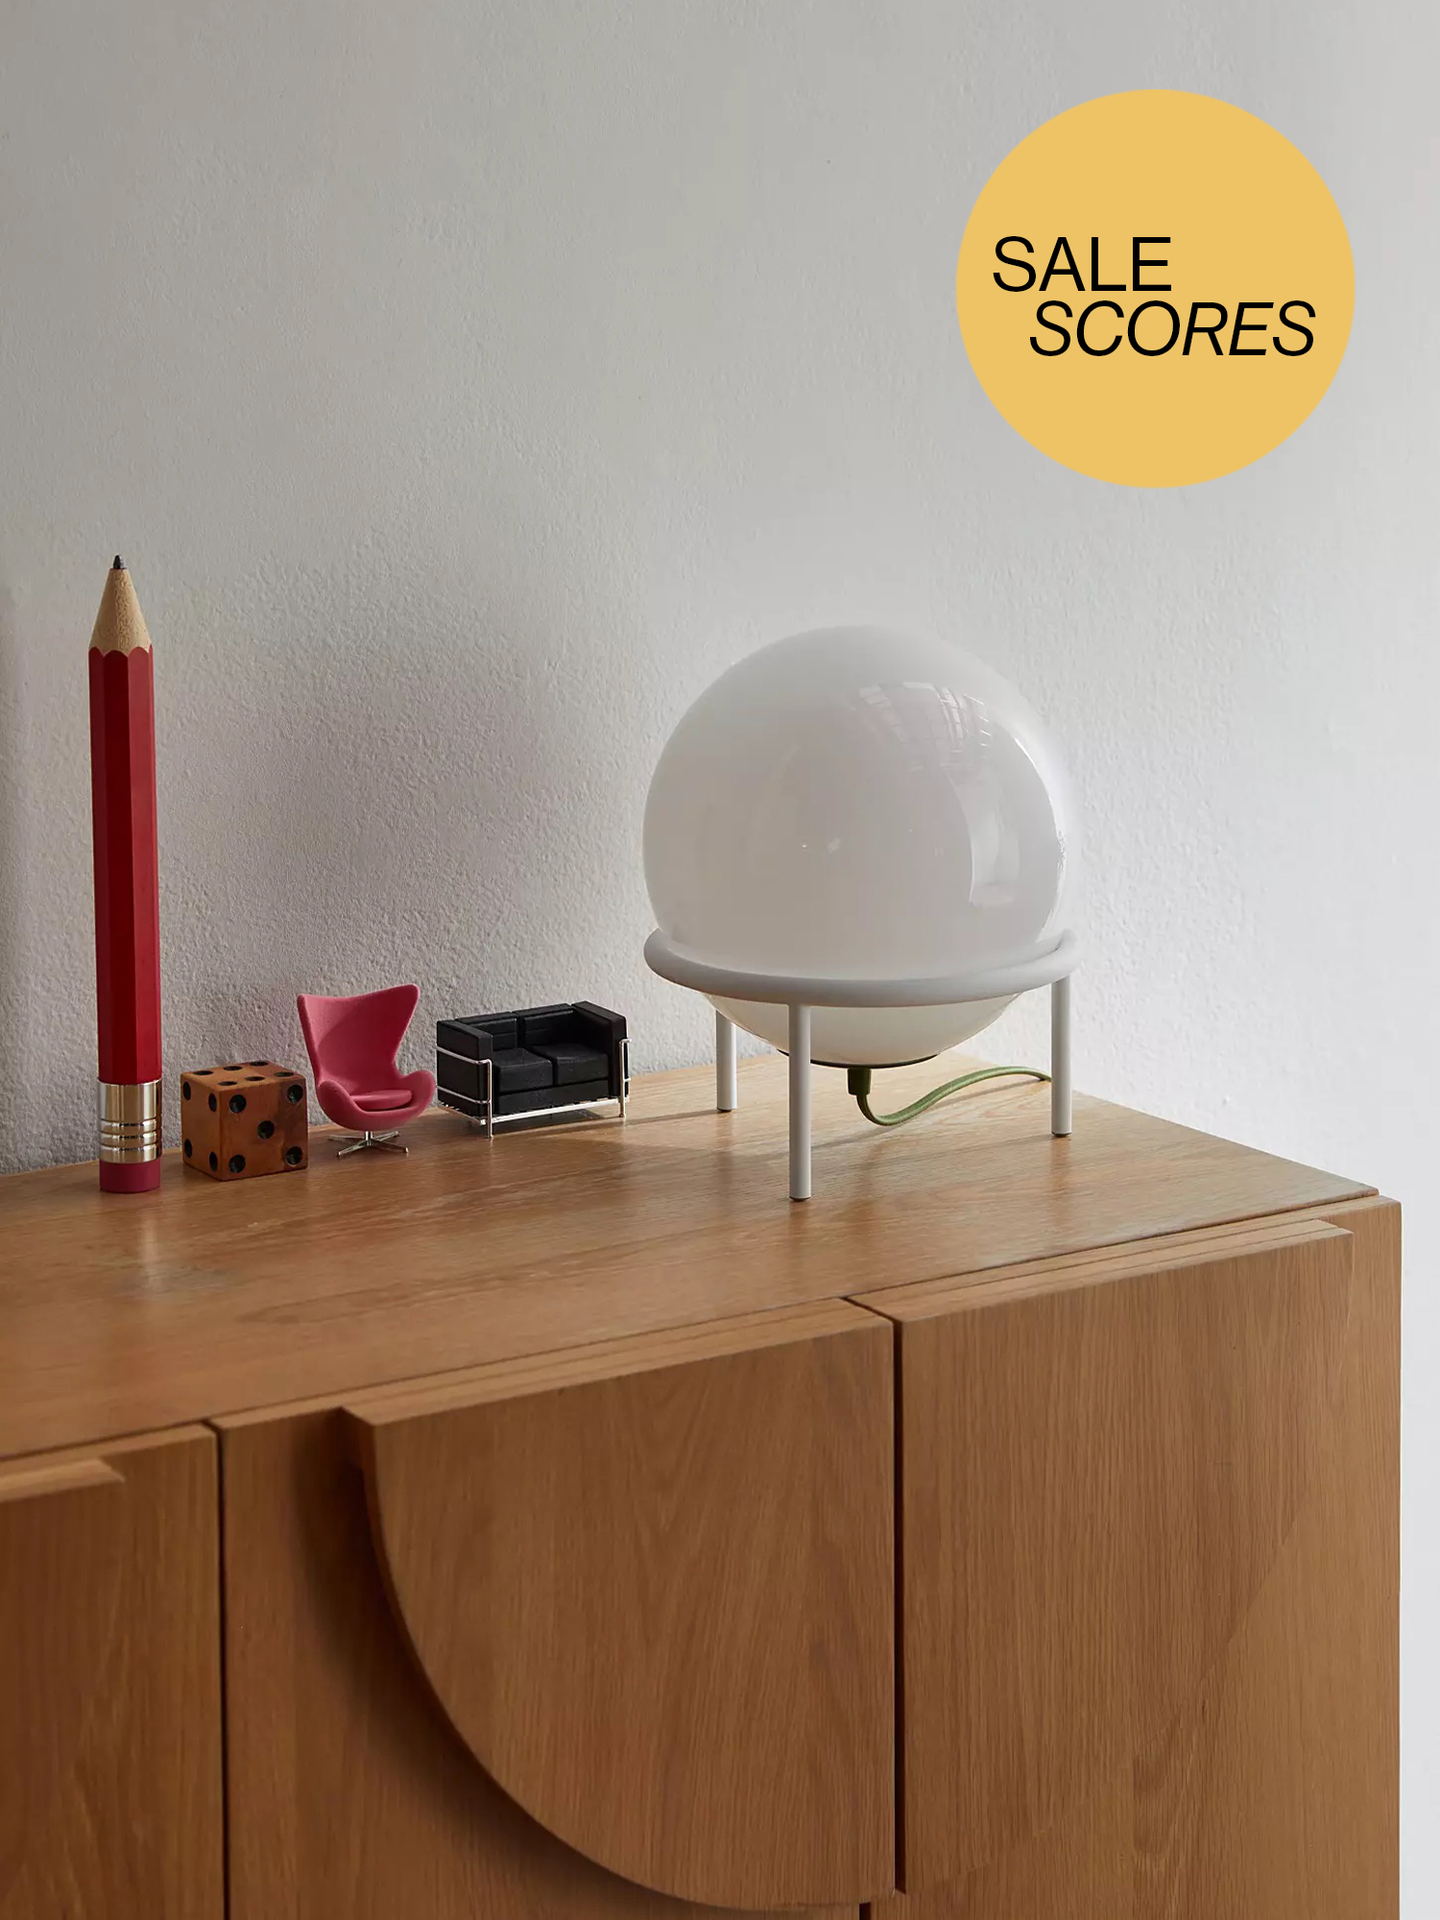 Urban Outfitters globe lamp with sale scores button